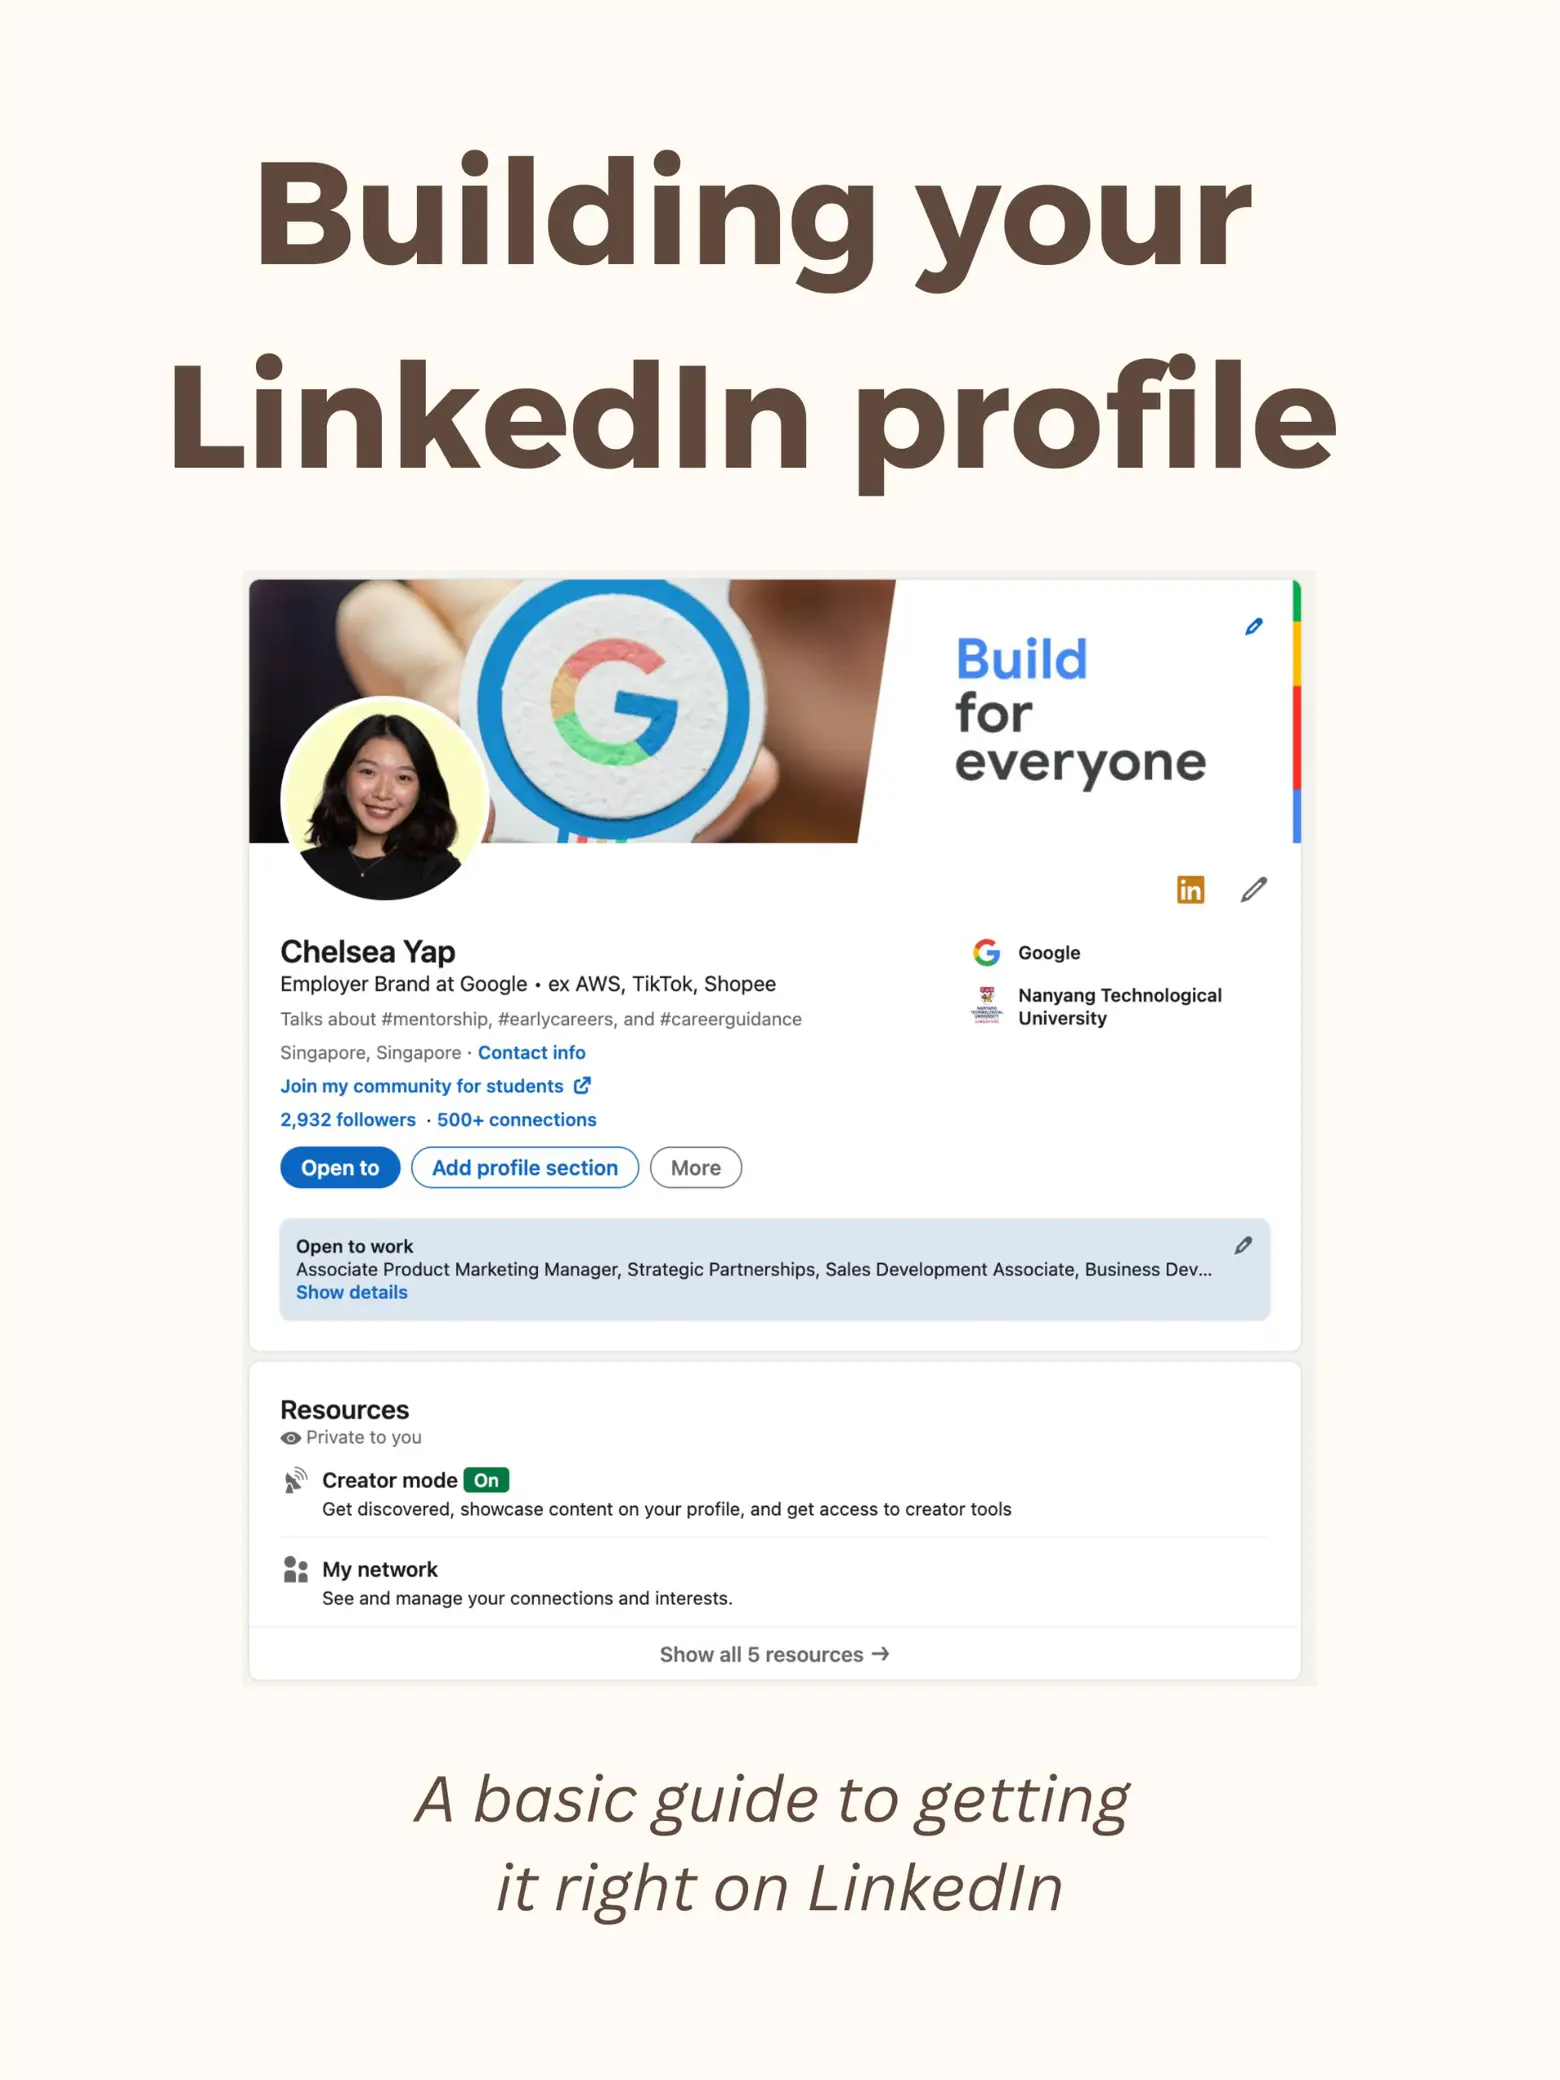 How To Build Your LinkedIn Profile